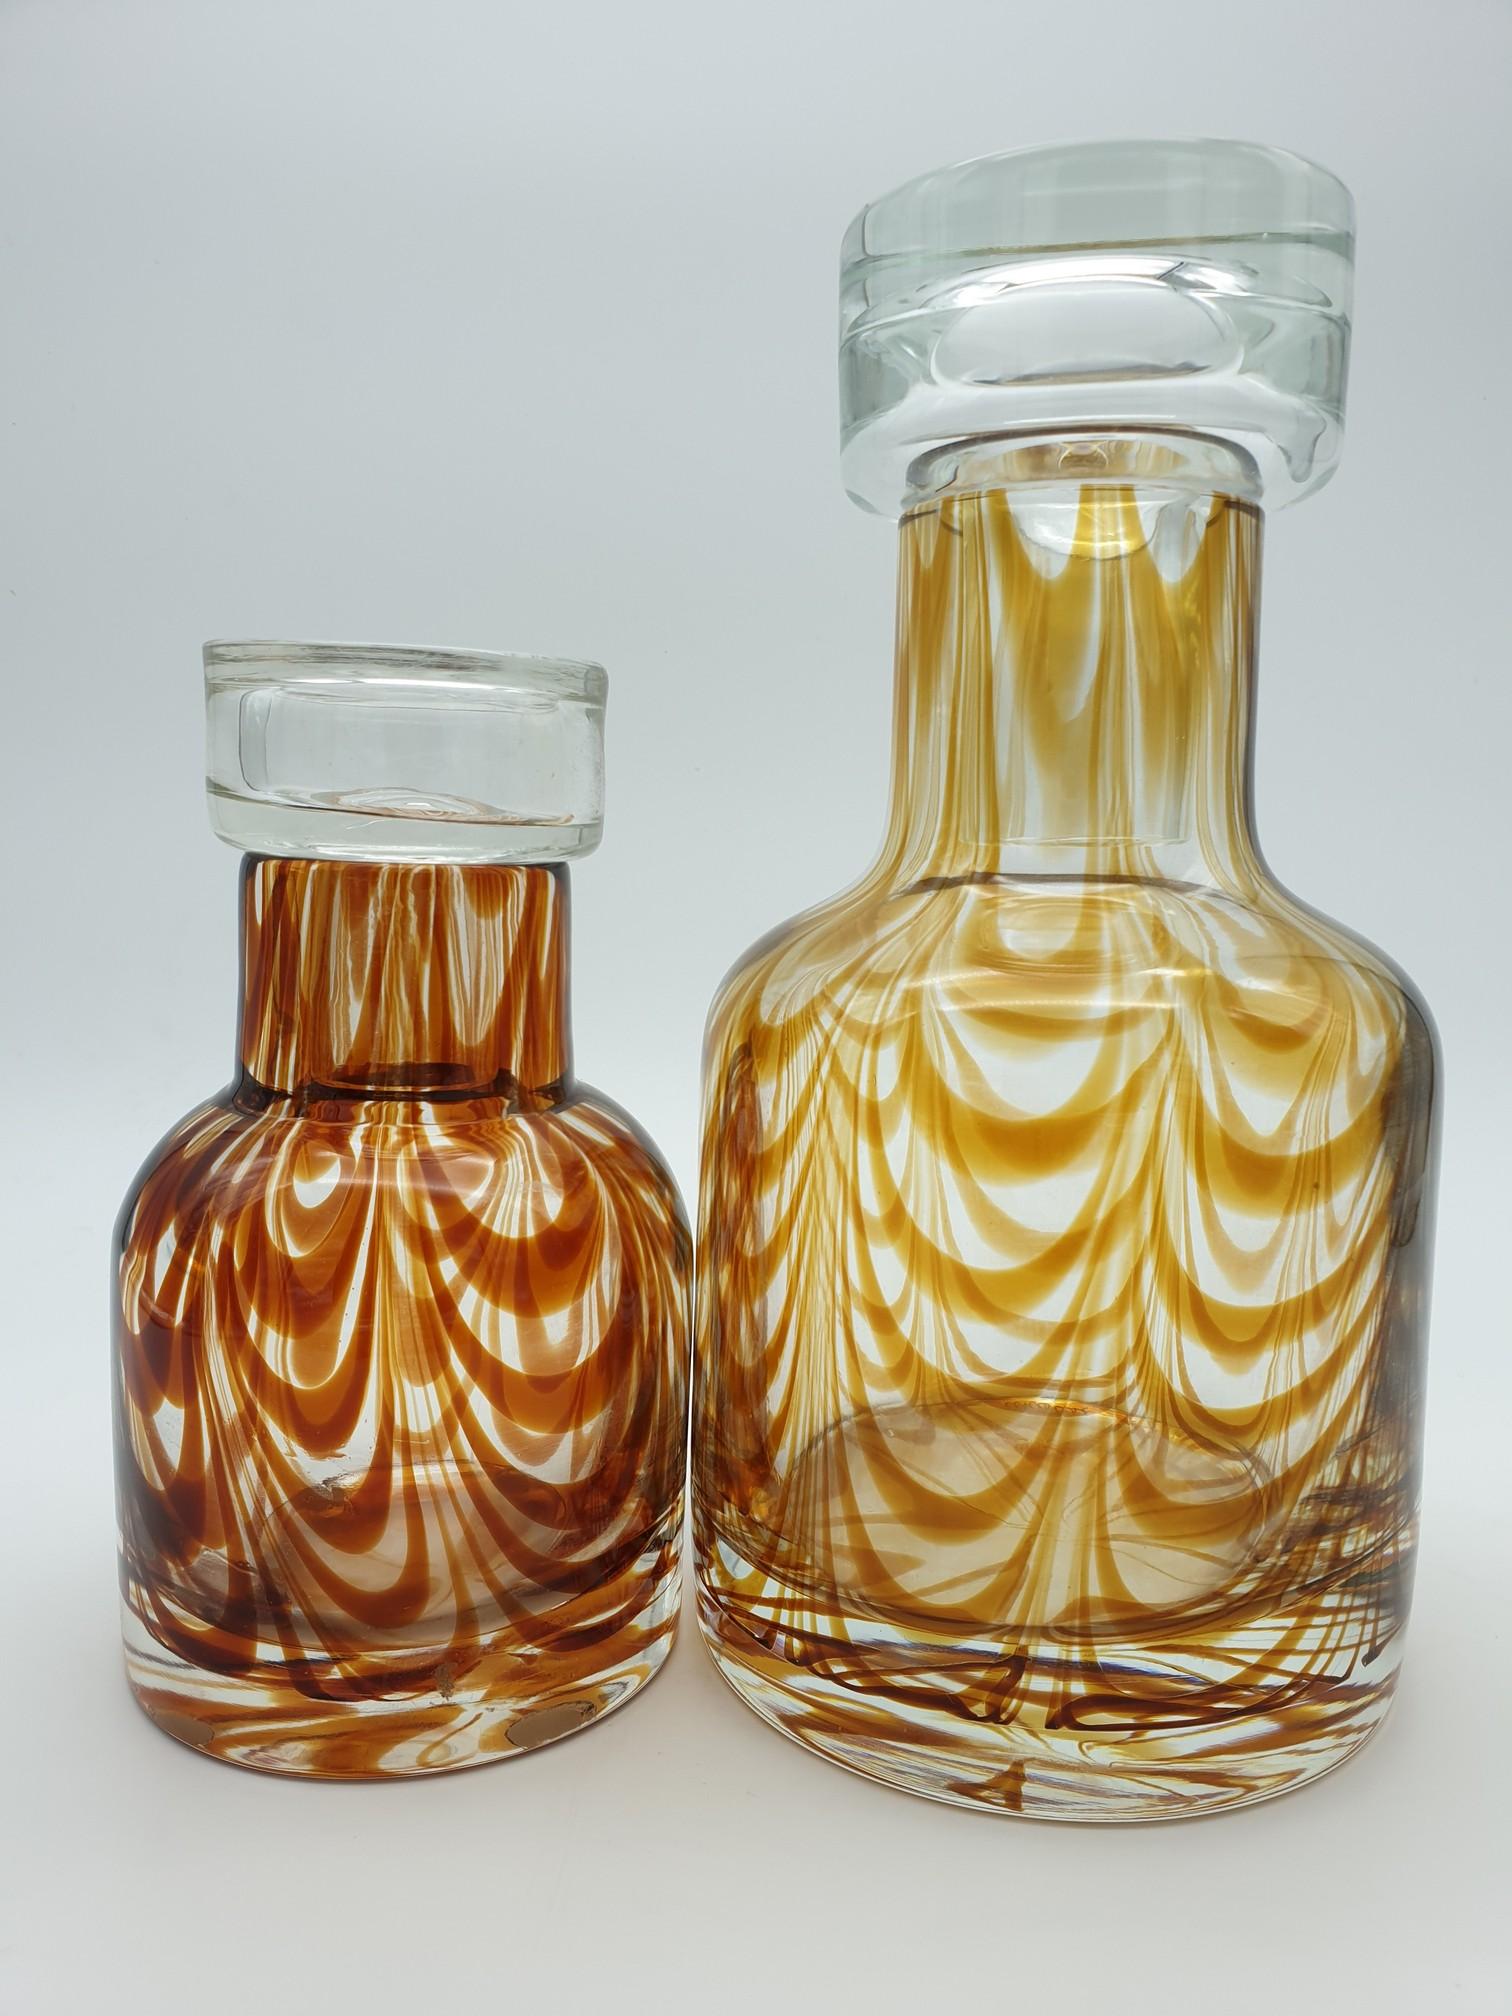 Pair of glass vases in clear color with amber 